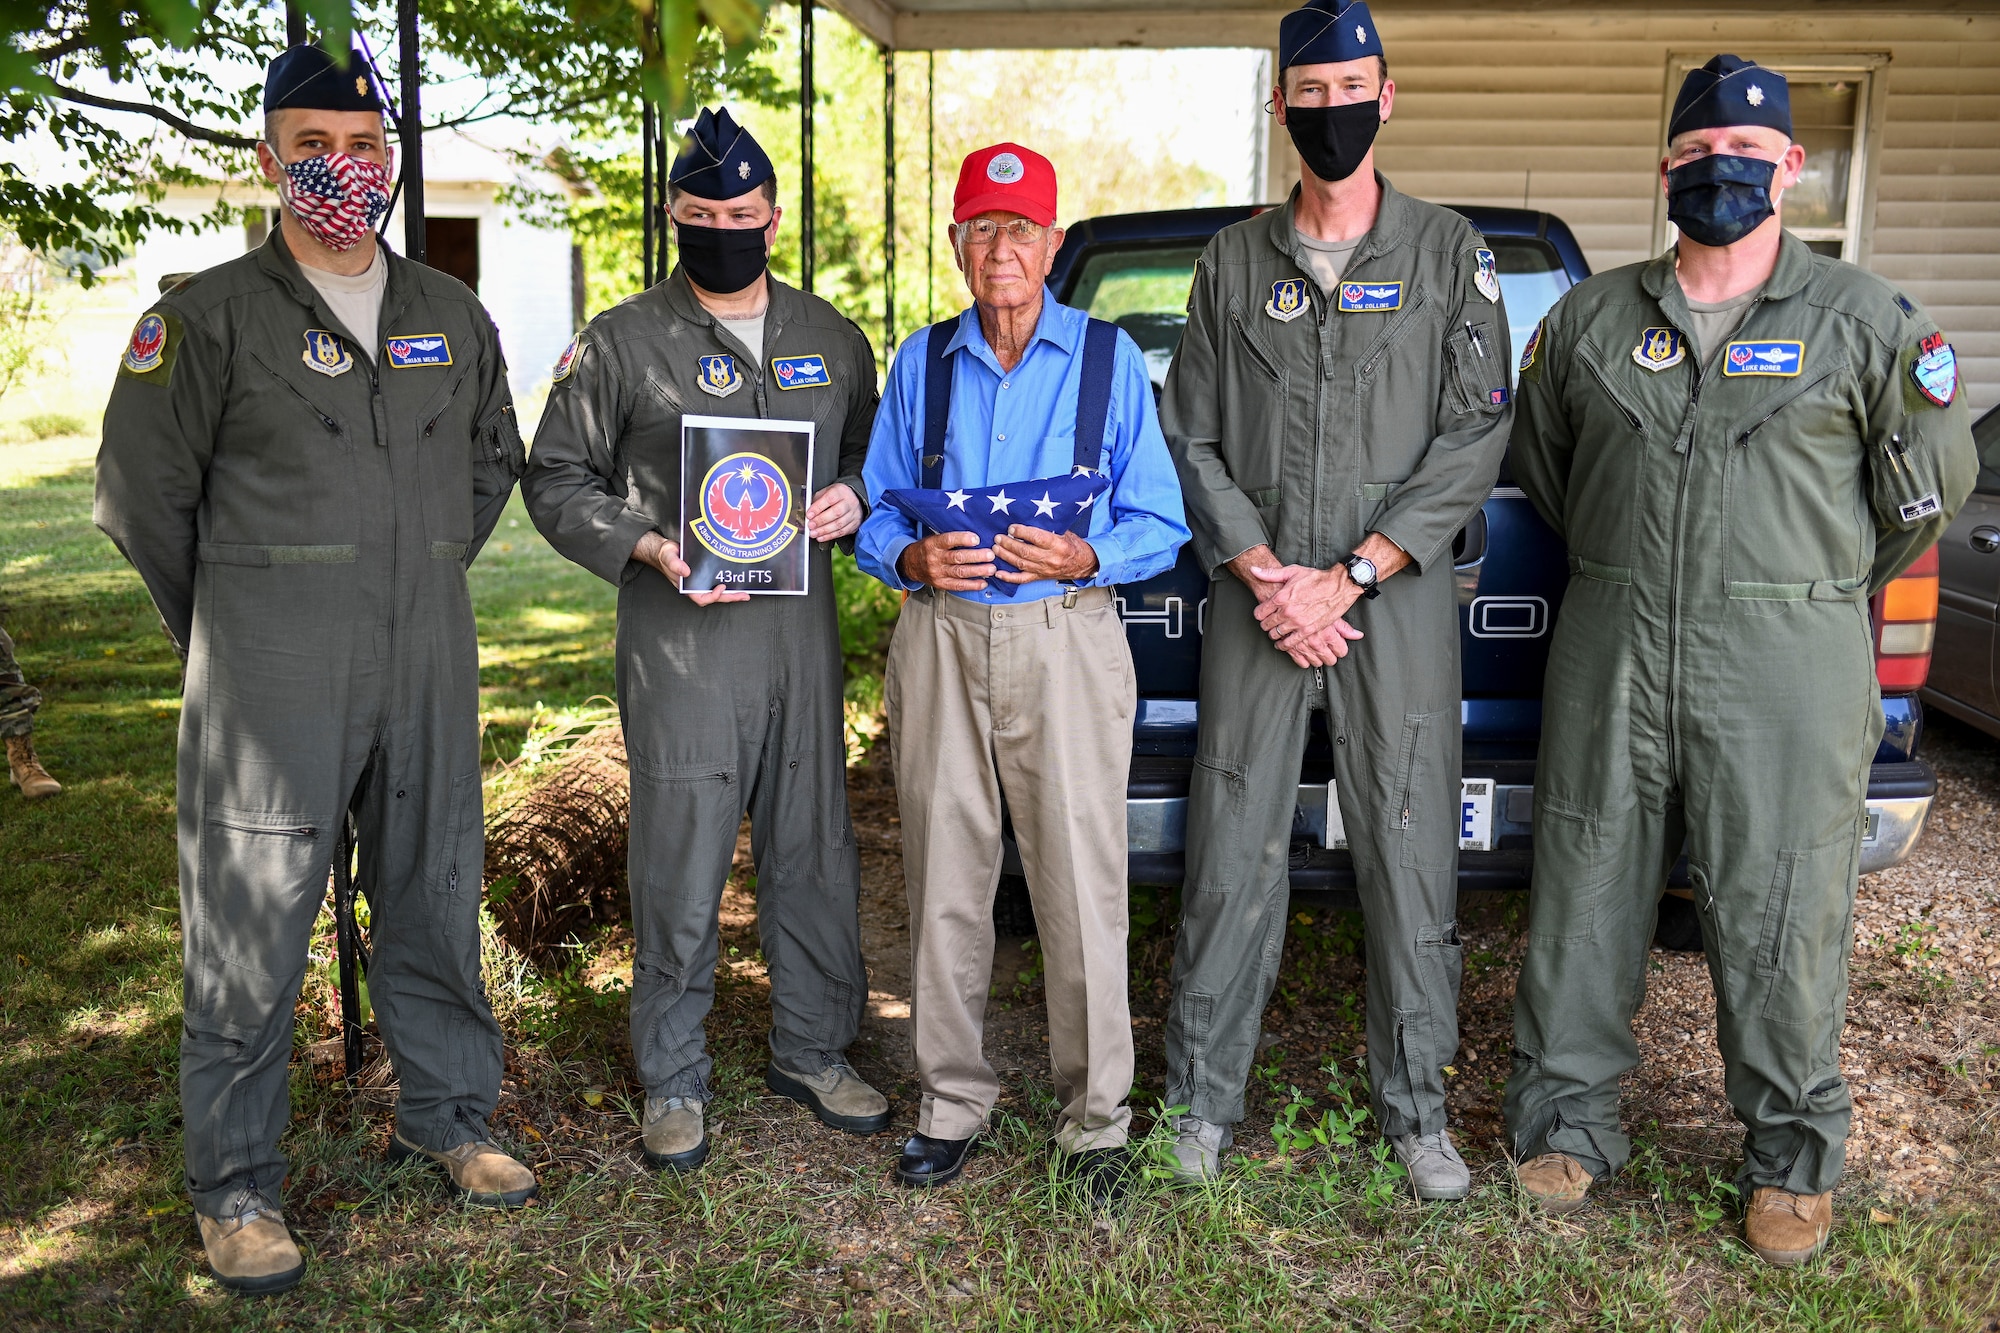 Bradford Freeman, assigned to ‘Easy’ Company, 2nd Battalion of the 506th Parachute Infantry Regiment of the 101st Airborne Division, stand with members from the 43rd Flying Training Squadron at Freeman’s residency Sept. 3, 2020 in Miss. The 43rd FTS flew an American Flag in each trainer airframe over Columbus Air Force Base, Miss. and raised the flag outside Freeman’s House in honor of his service and sacrifice to the U.S. (U.S. Air Force photo by Senior Airman Keith Holcomb)